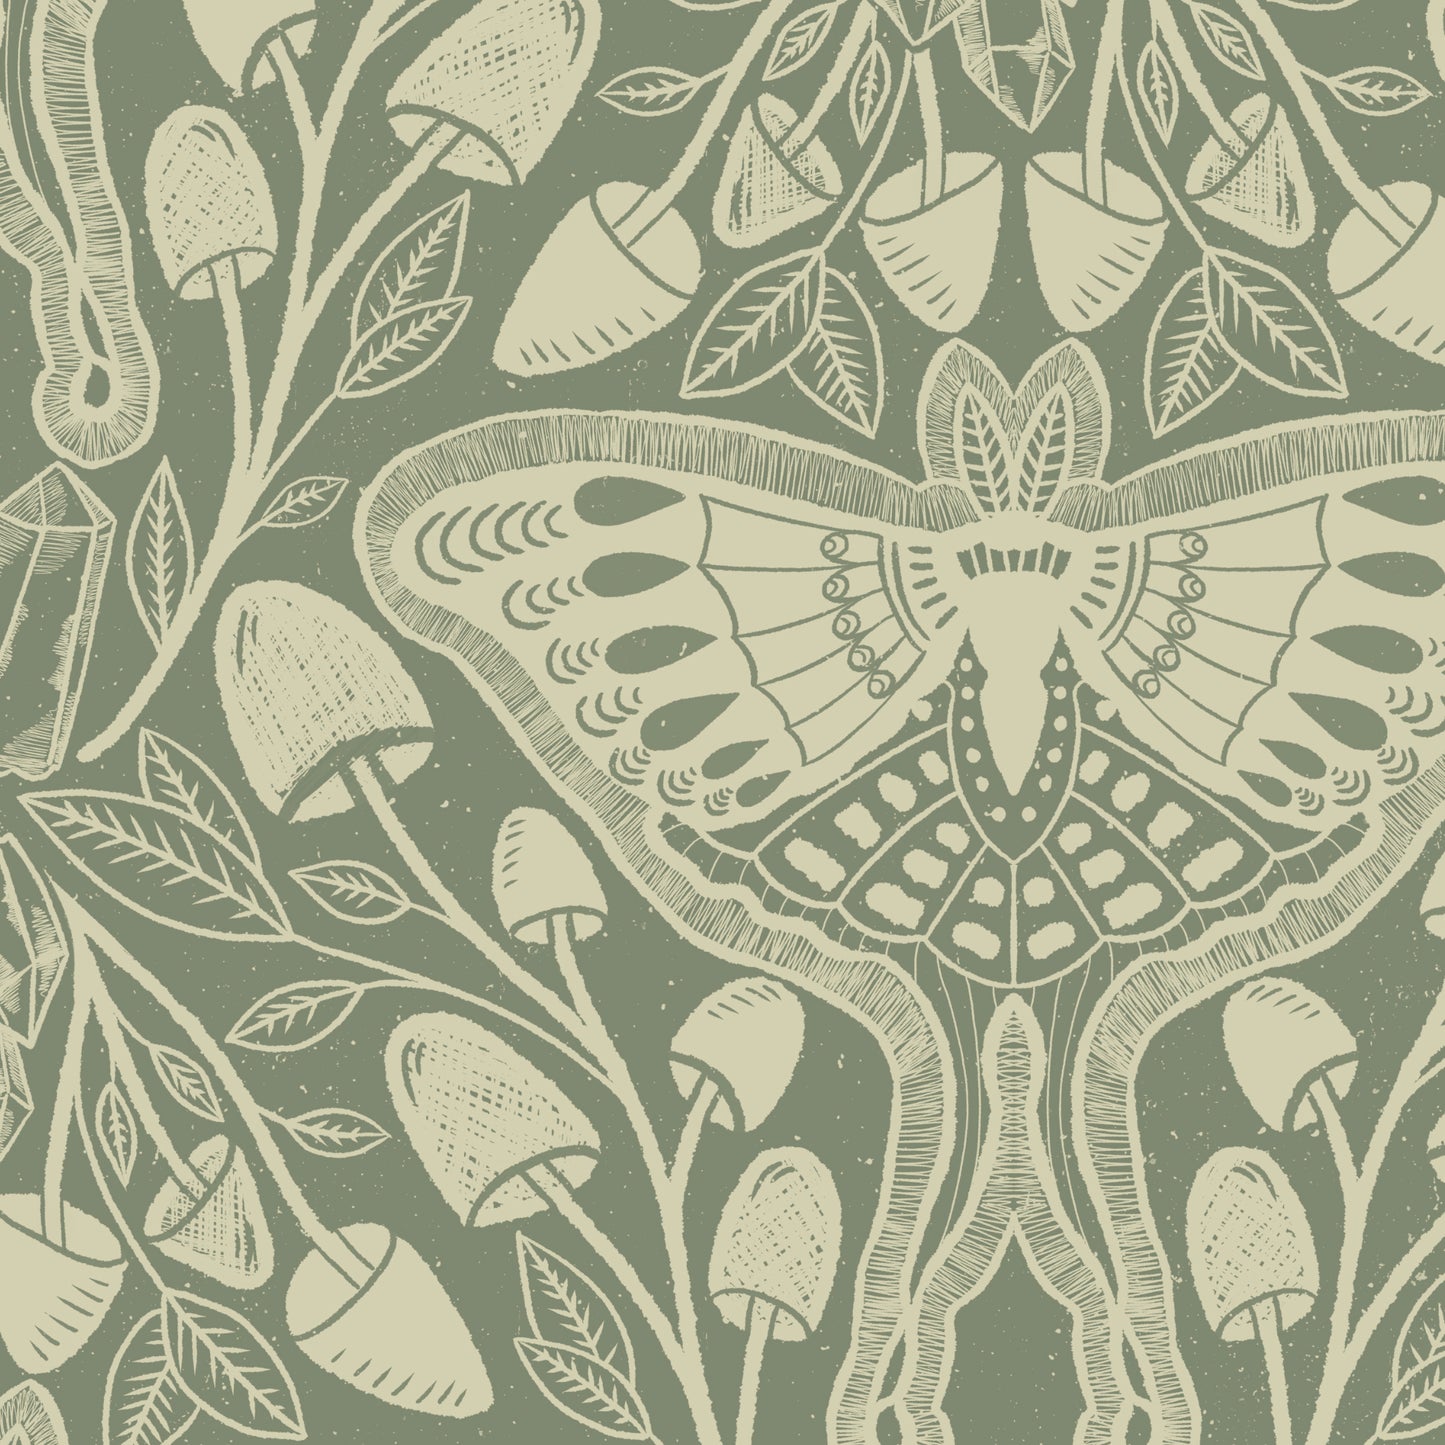 Luna Moths Wallpaper in Green shown in a close up view.